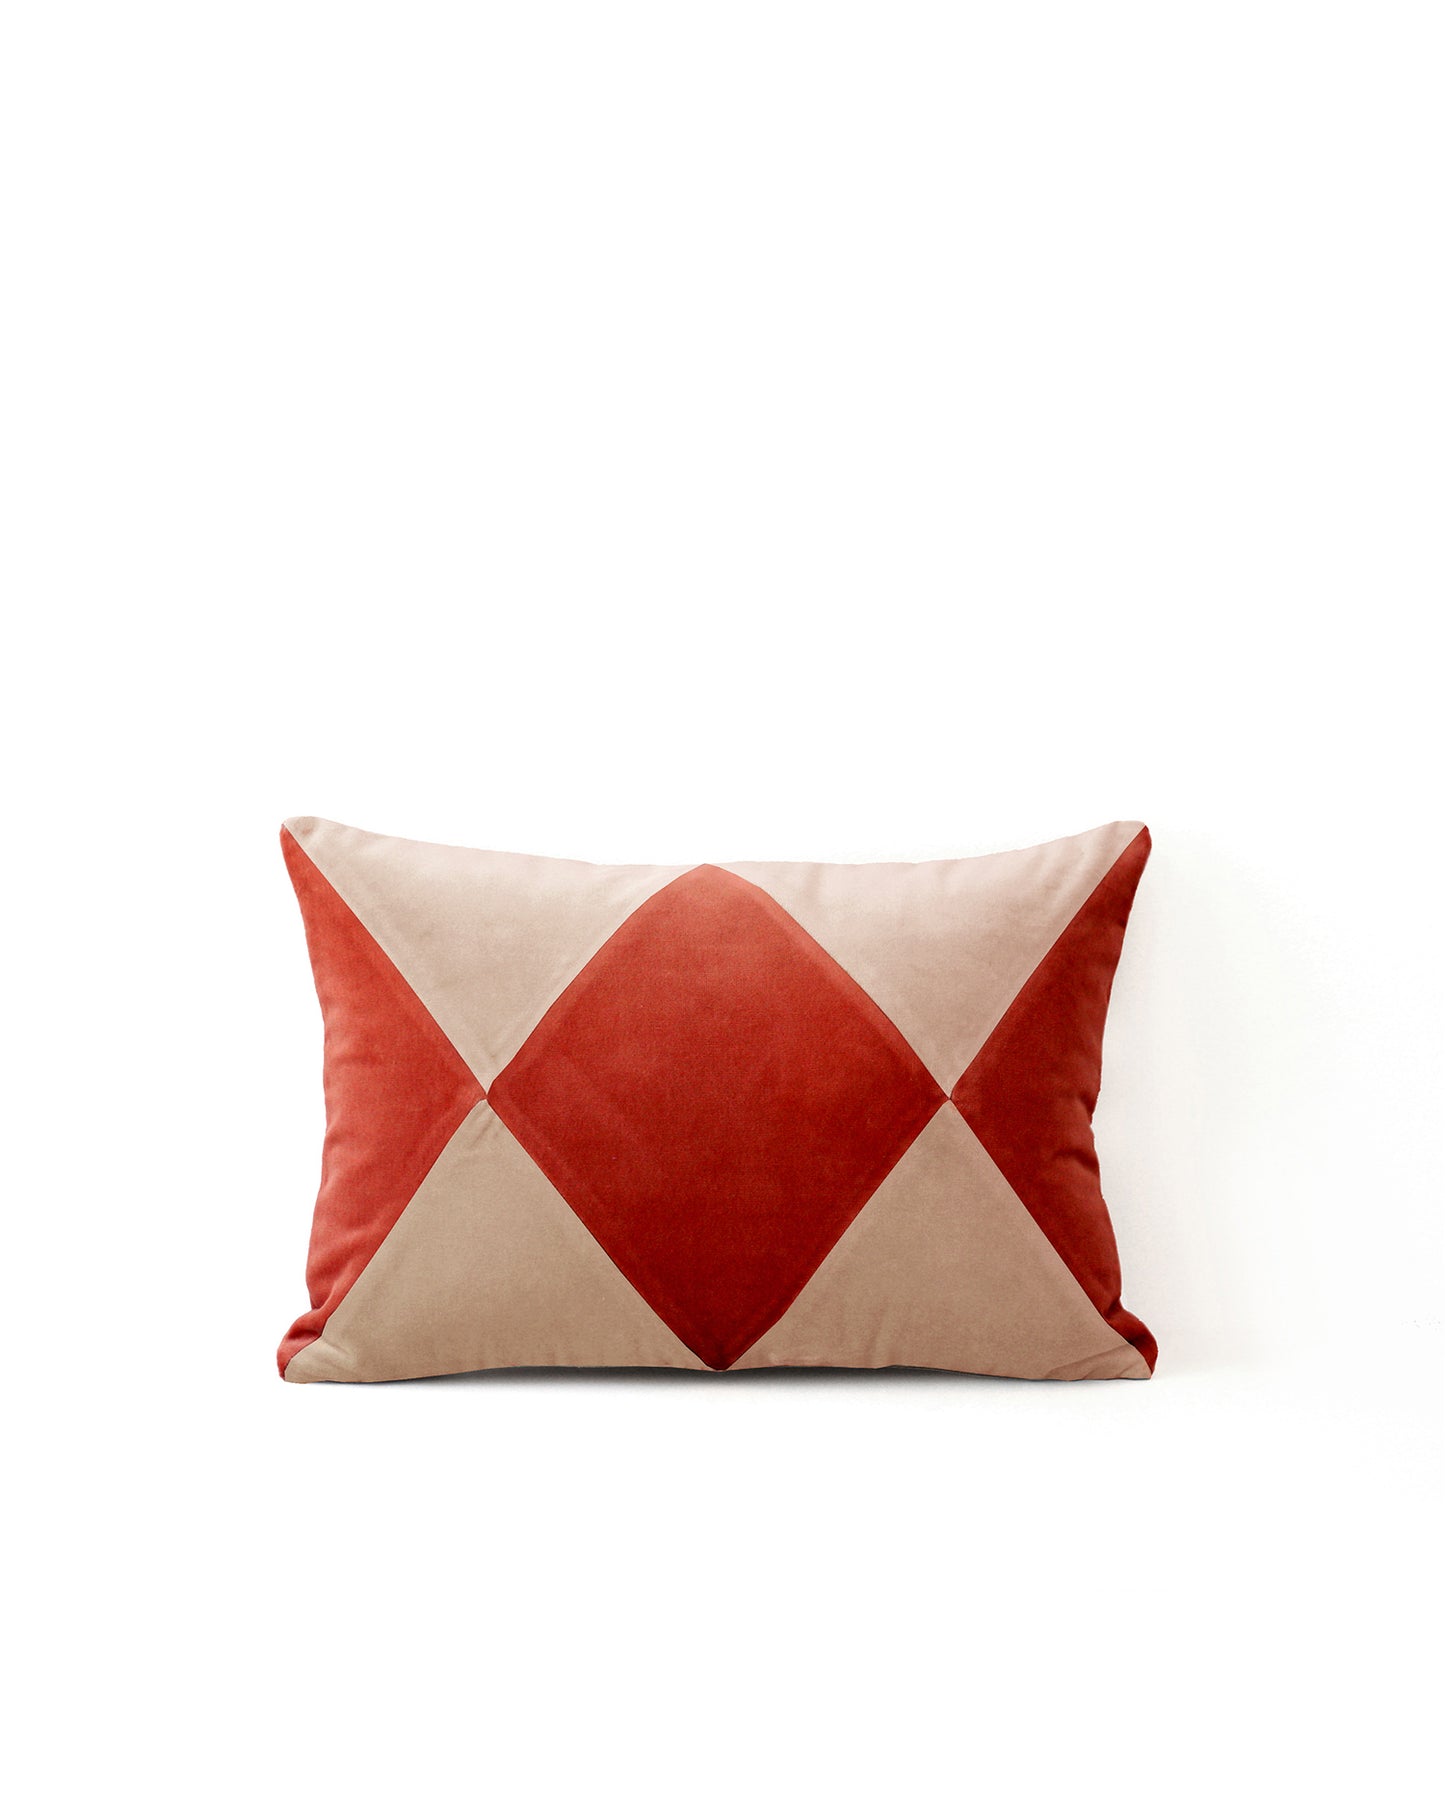 terracota Luxury Velvet Pillow handmade with cotton velvet by My Friend Paco home accessories